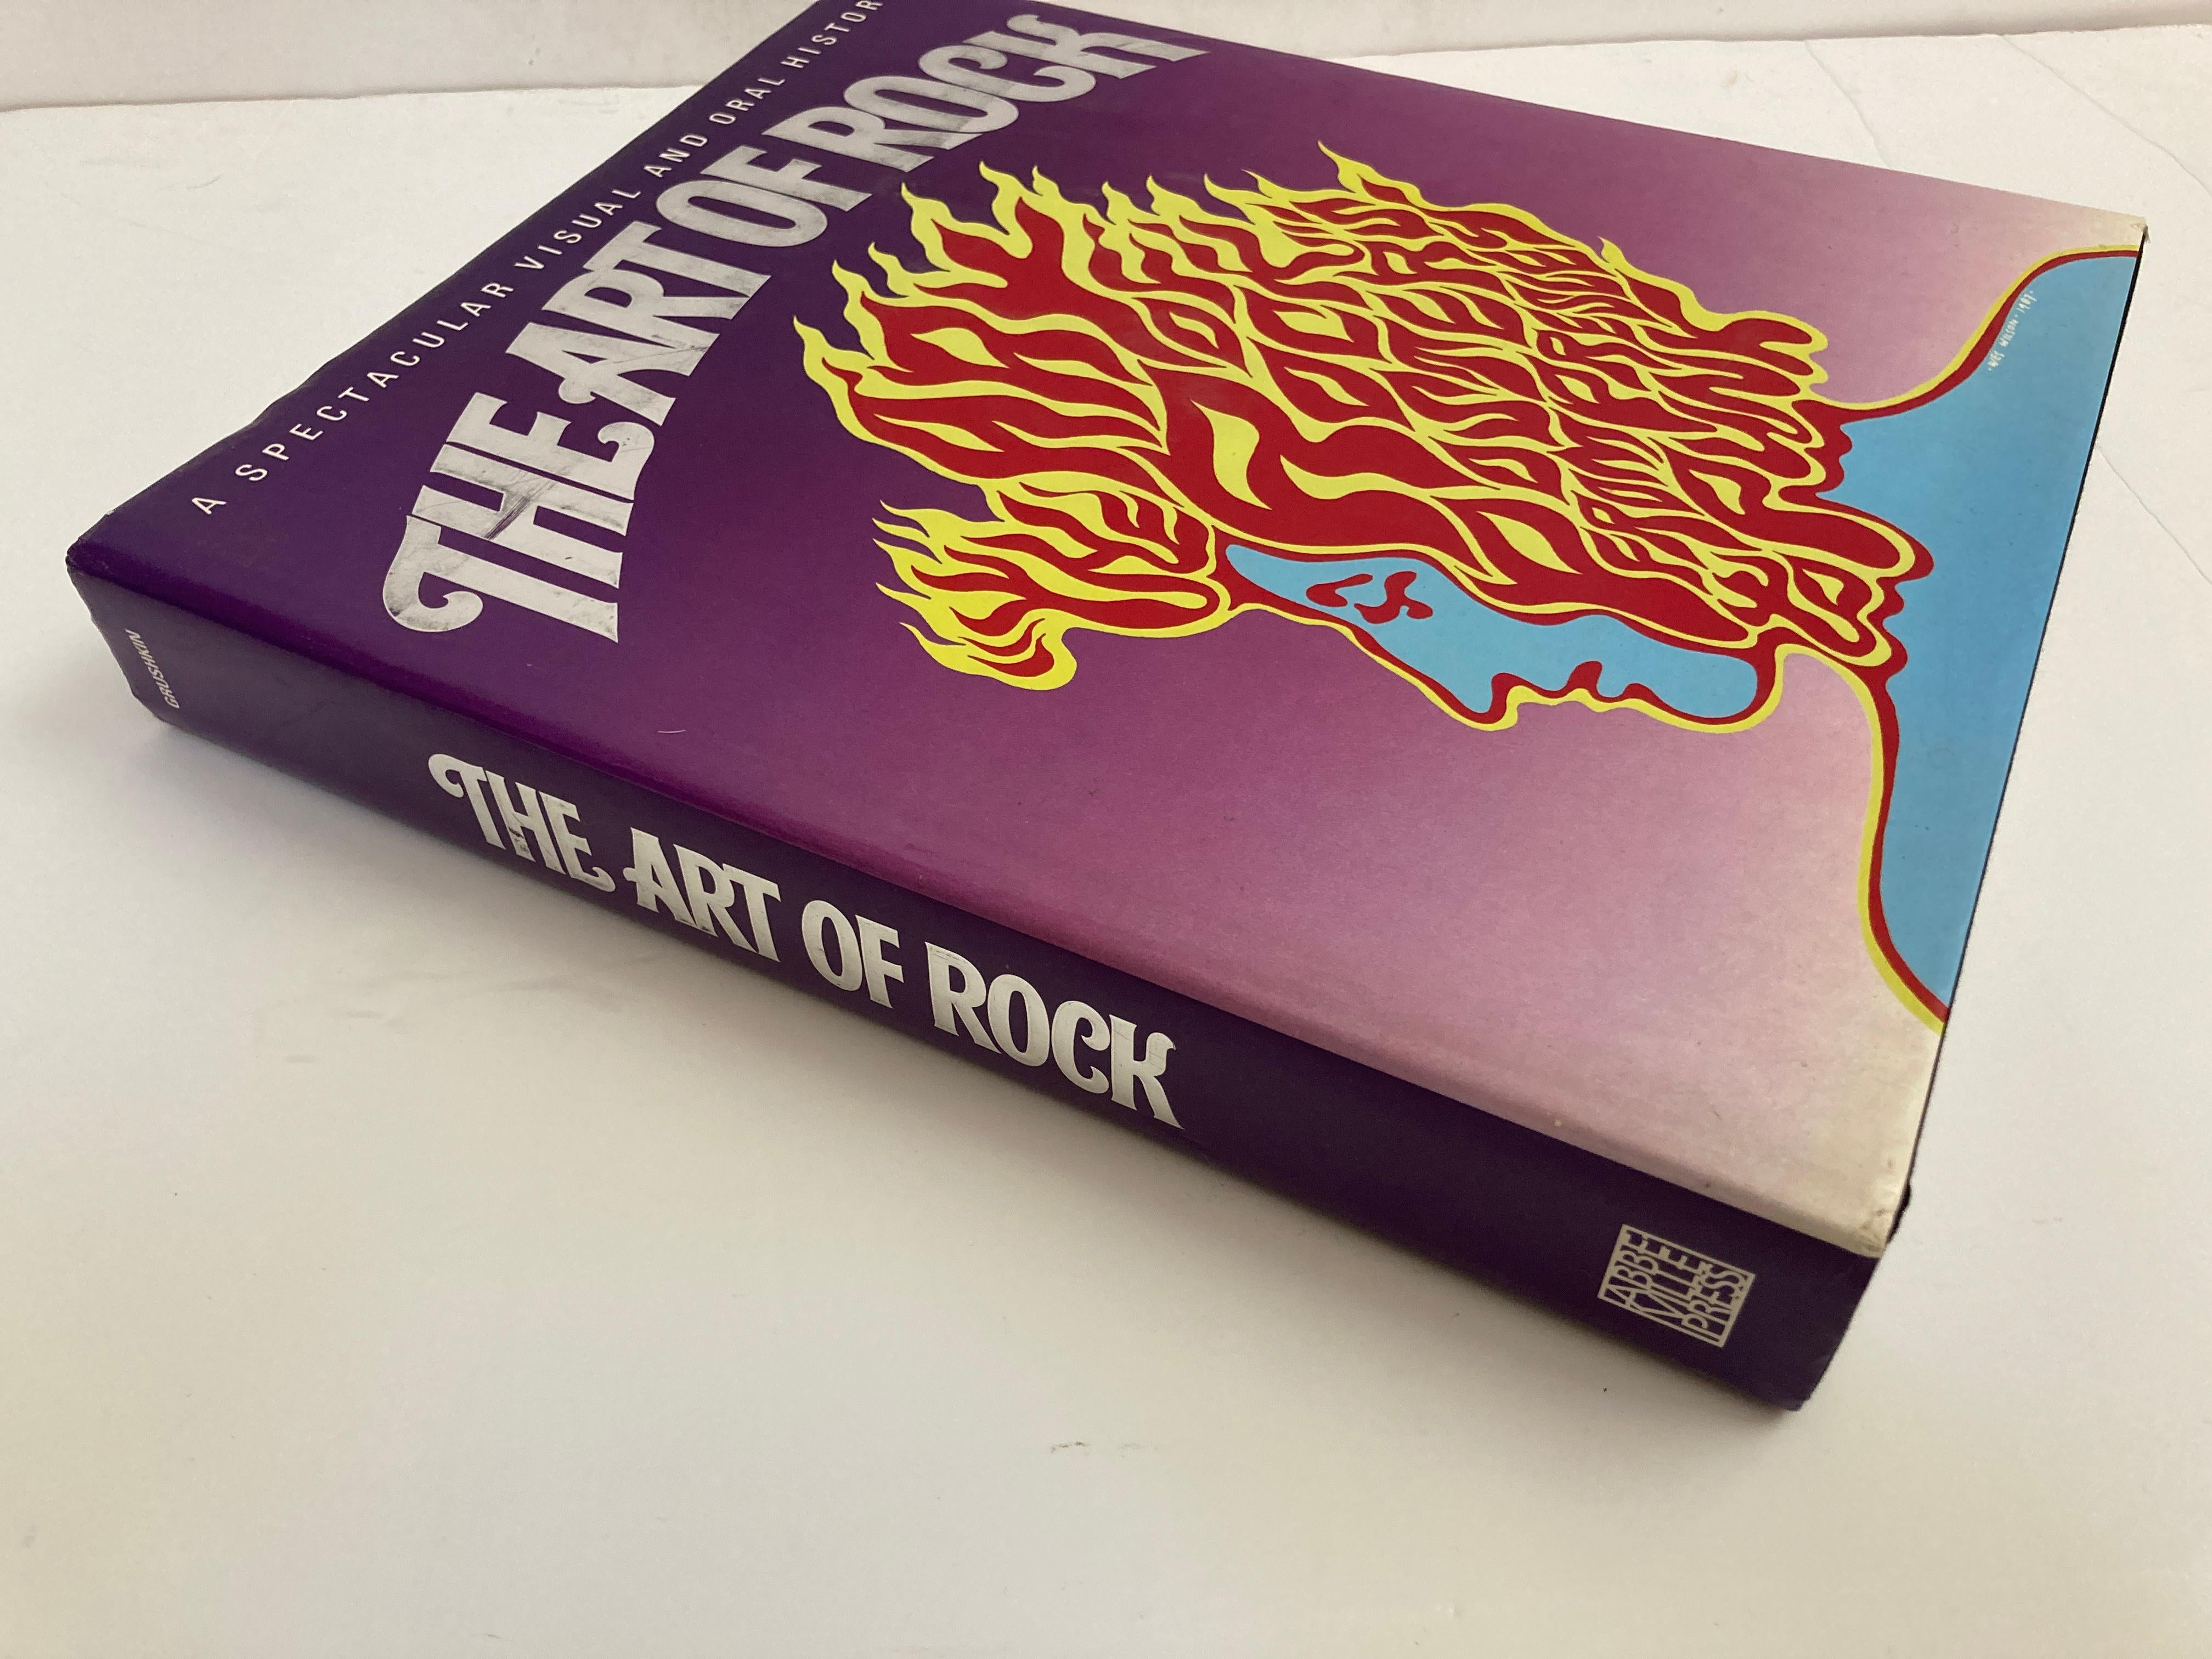 A riotous feast of images that will give rock music fans a nostalgic high. Electric, outrageous, erotic, blatant, vital - 1,500 rock concert posters from the 1950s through today are reproduced in their original blazing colors in this complete visual